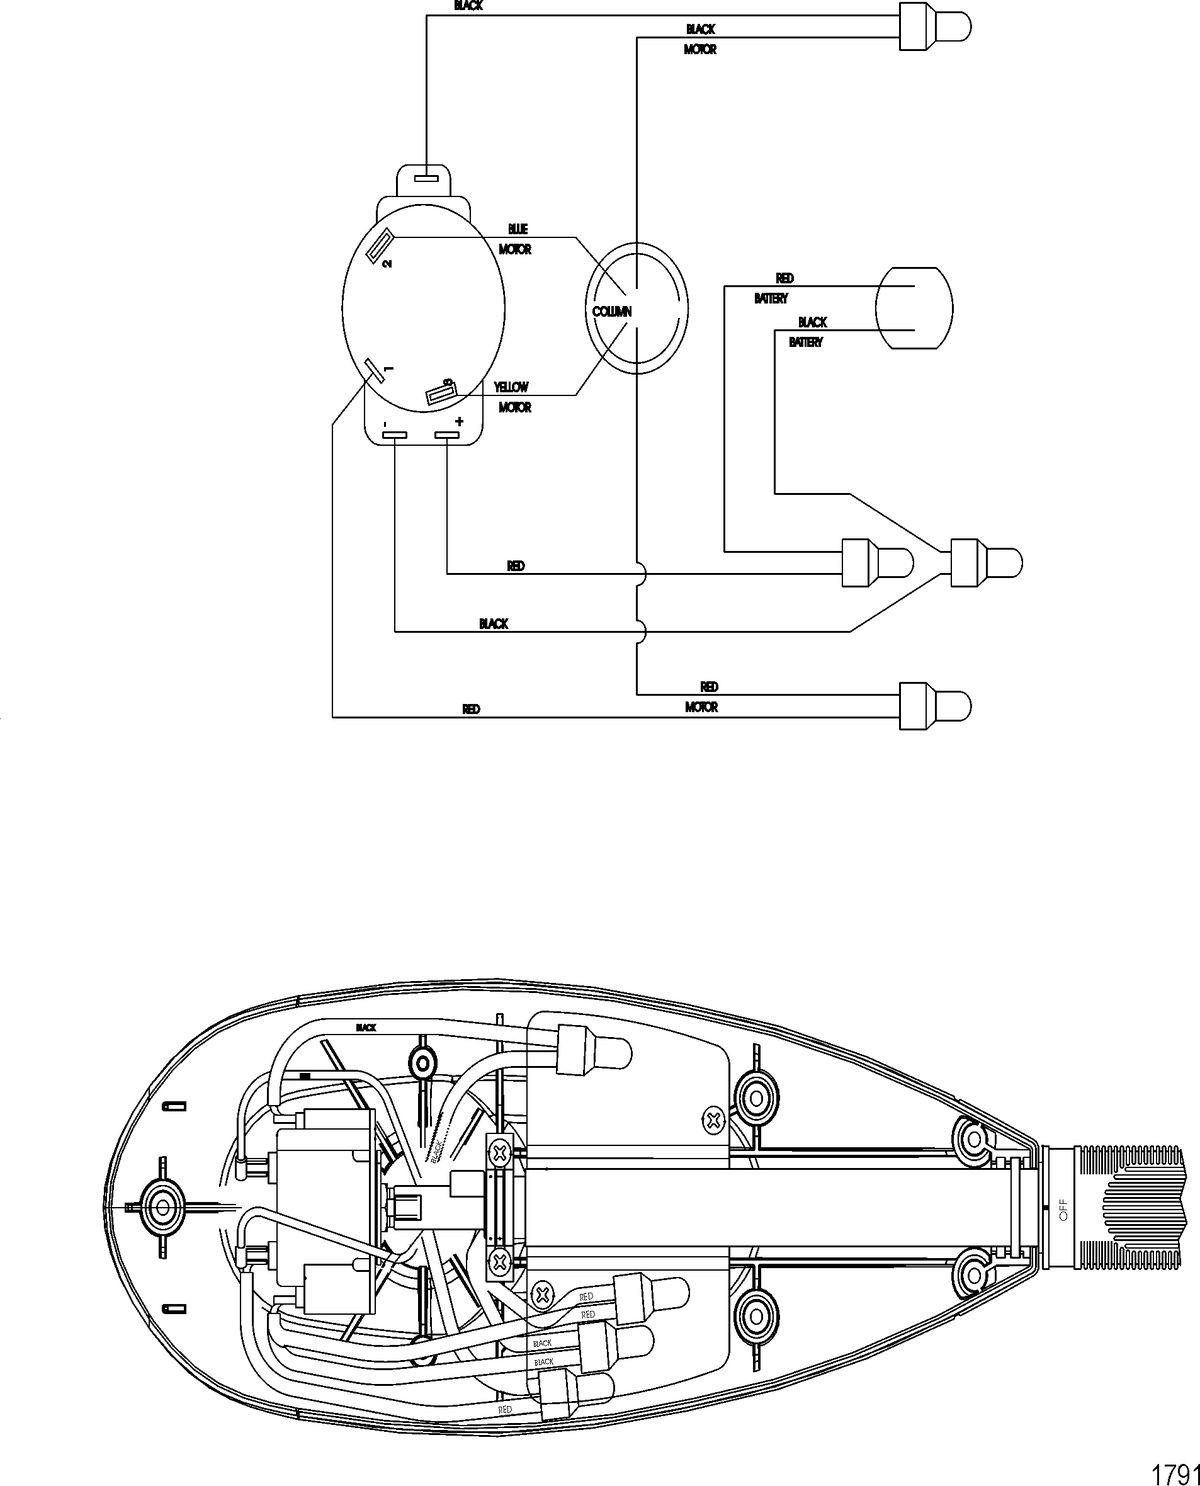 TROLLING MOTOR MOTORGUIDE FRESH WATER SERIES Wire Diagram(Model FW30HT) (Without Quick Connect)